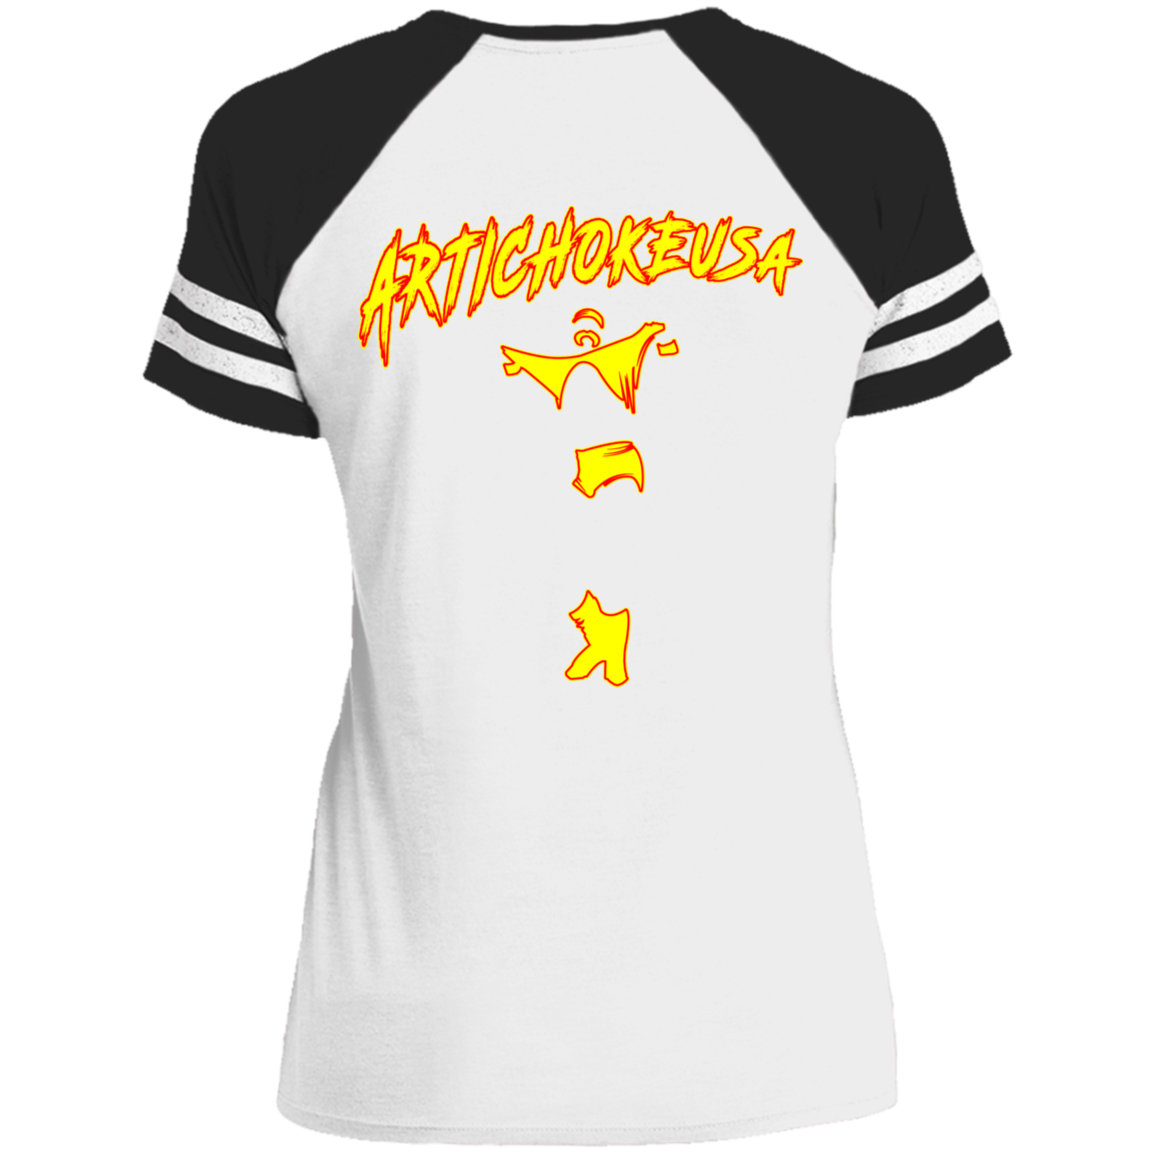 ArtichokeUSA Character and Font Design. Let’s Create Your Own Design Today. Fan Art. The Hulkster. Ladies' Game V-Neck T-Shirt